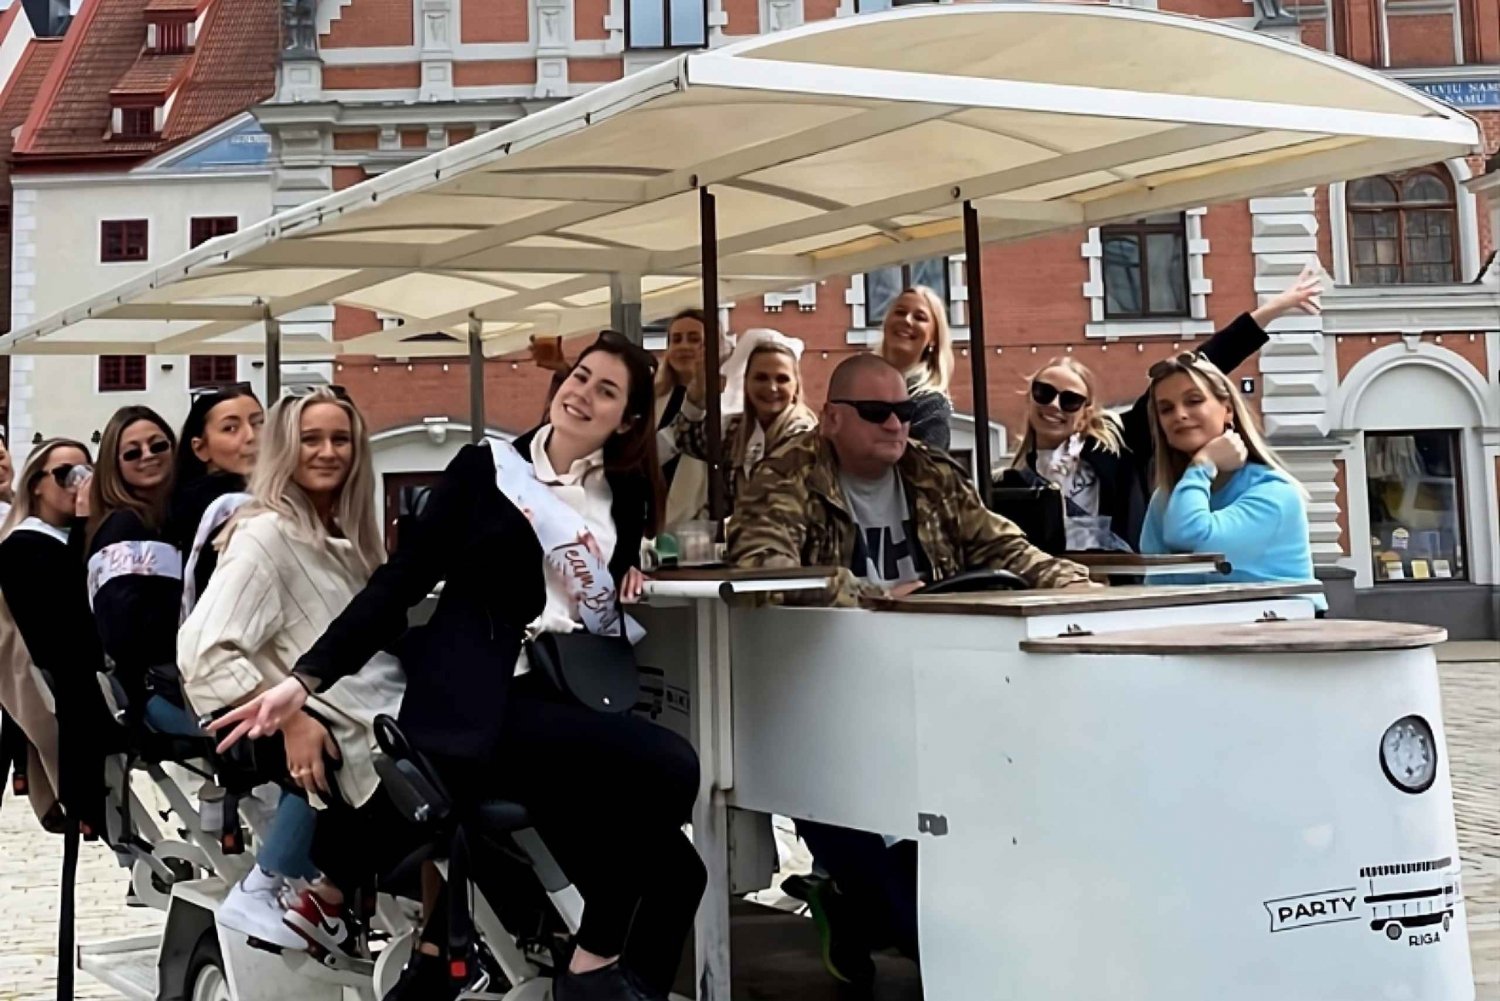 Prosecco Bike & Old Town Sightseeing